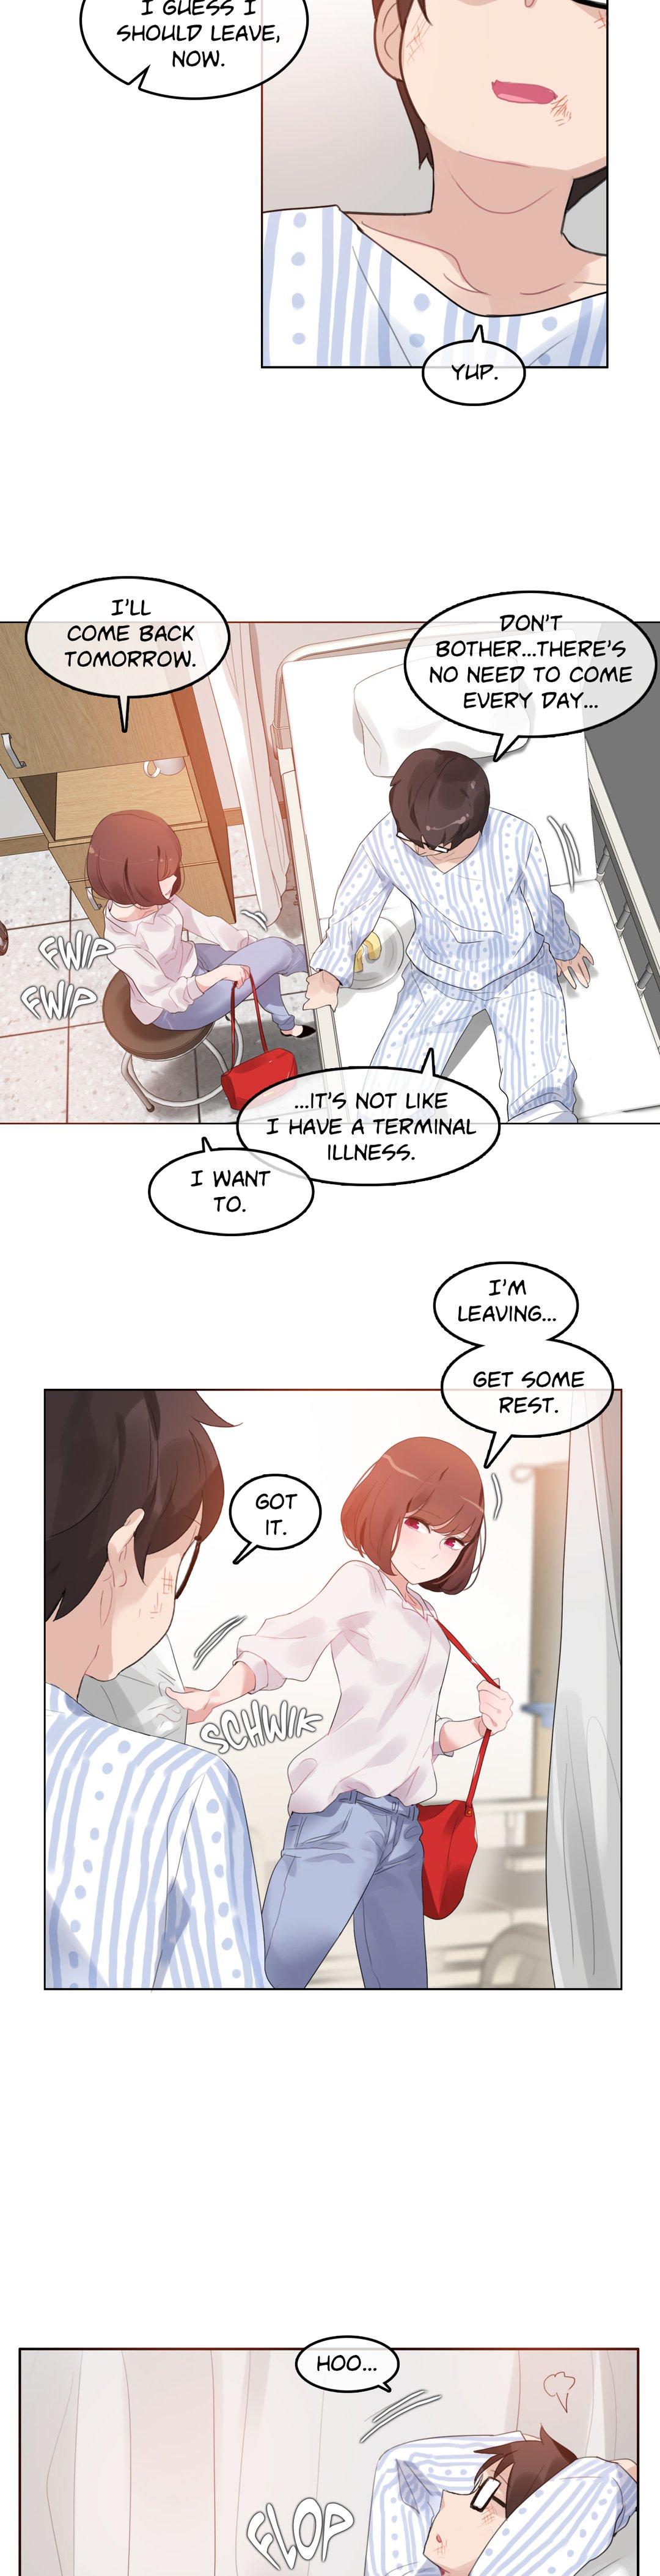 A Pervert's Daily Life • Chapter 46-50 15